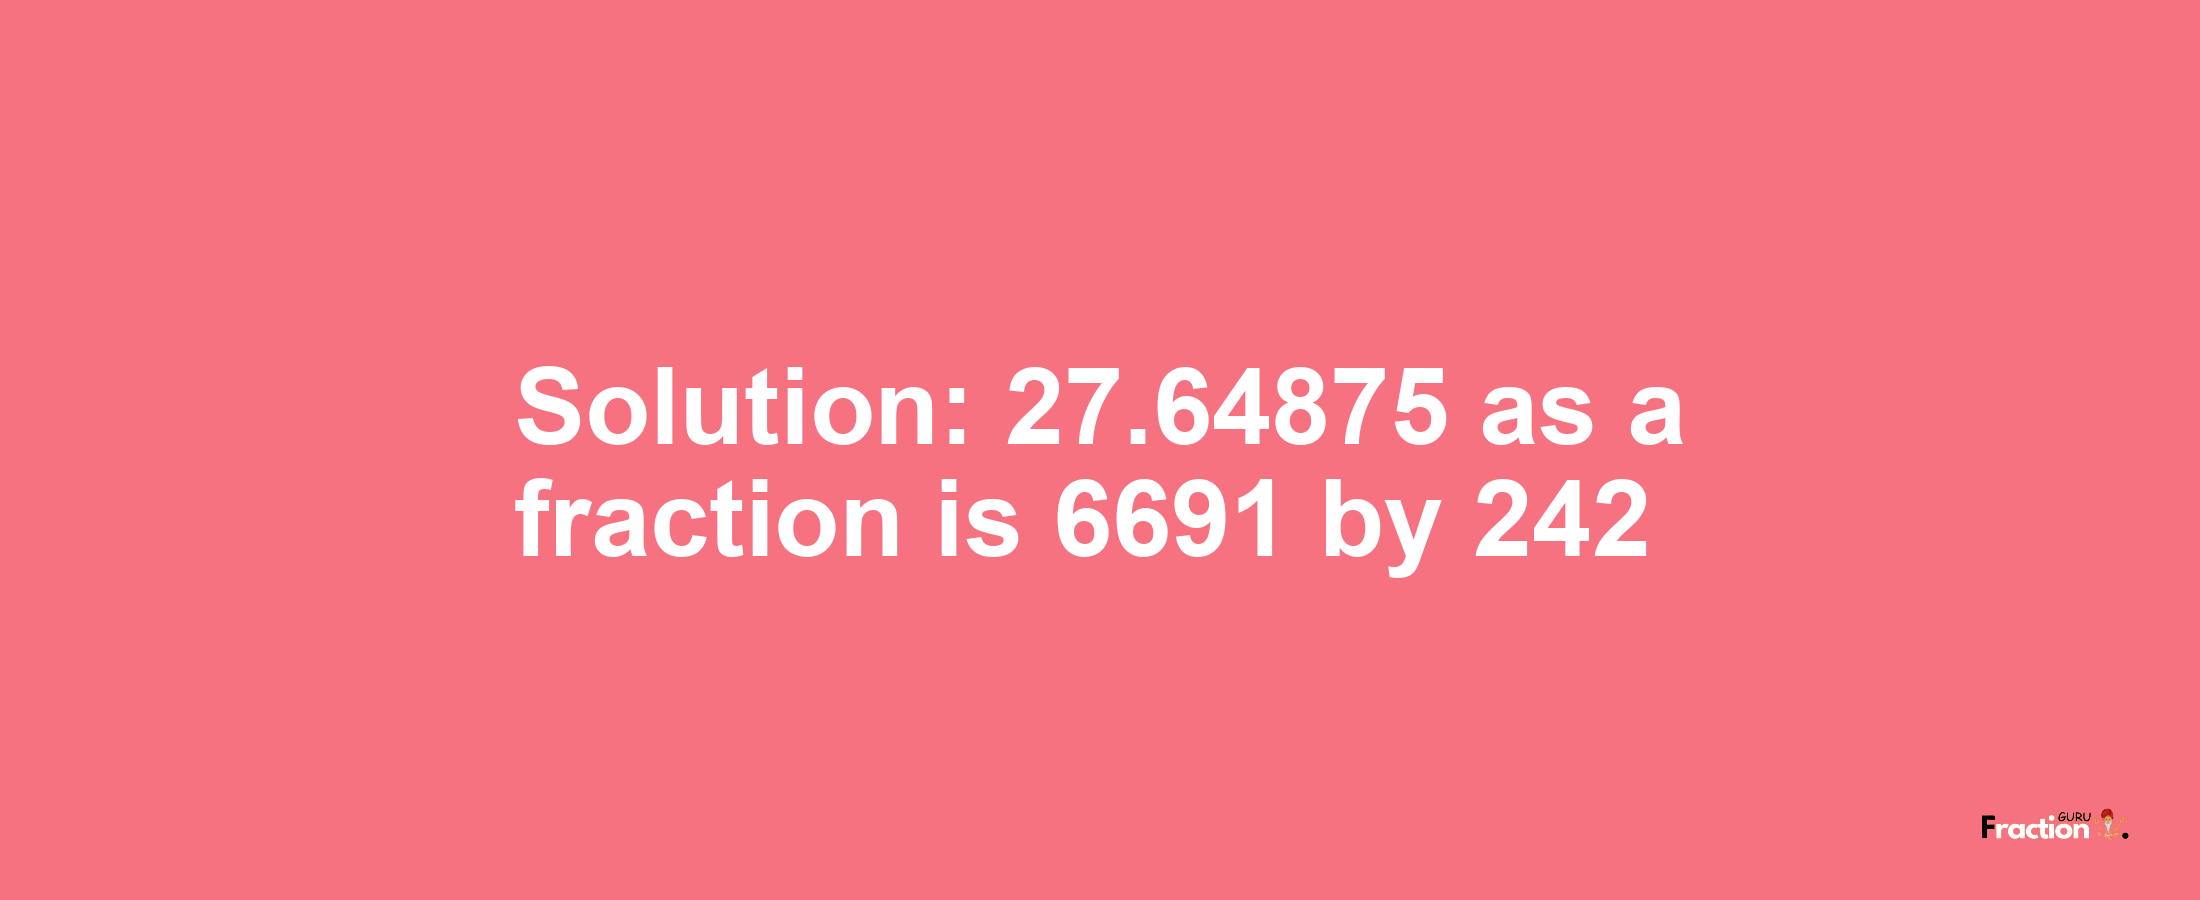 Solution:27.64875 as a fraction is 6691/242